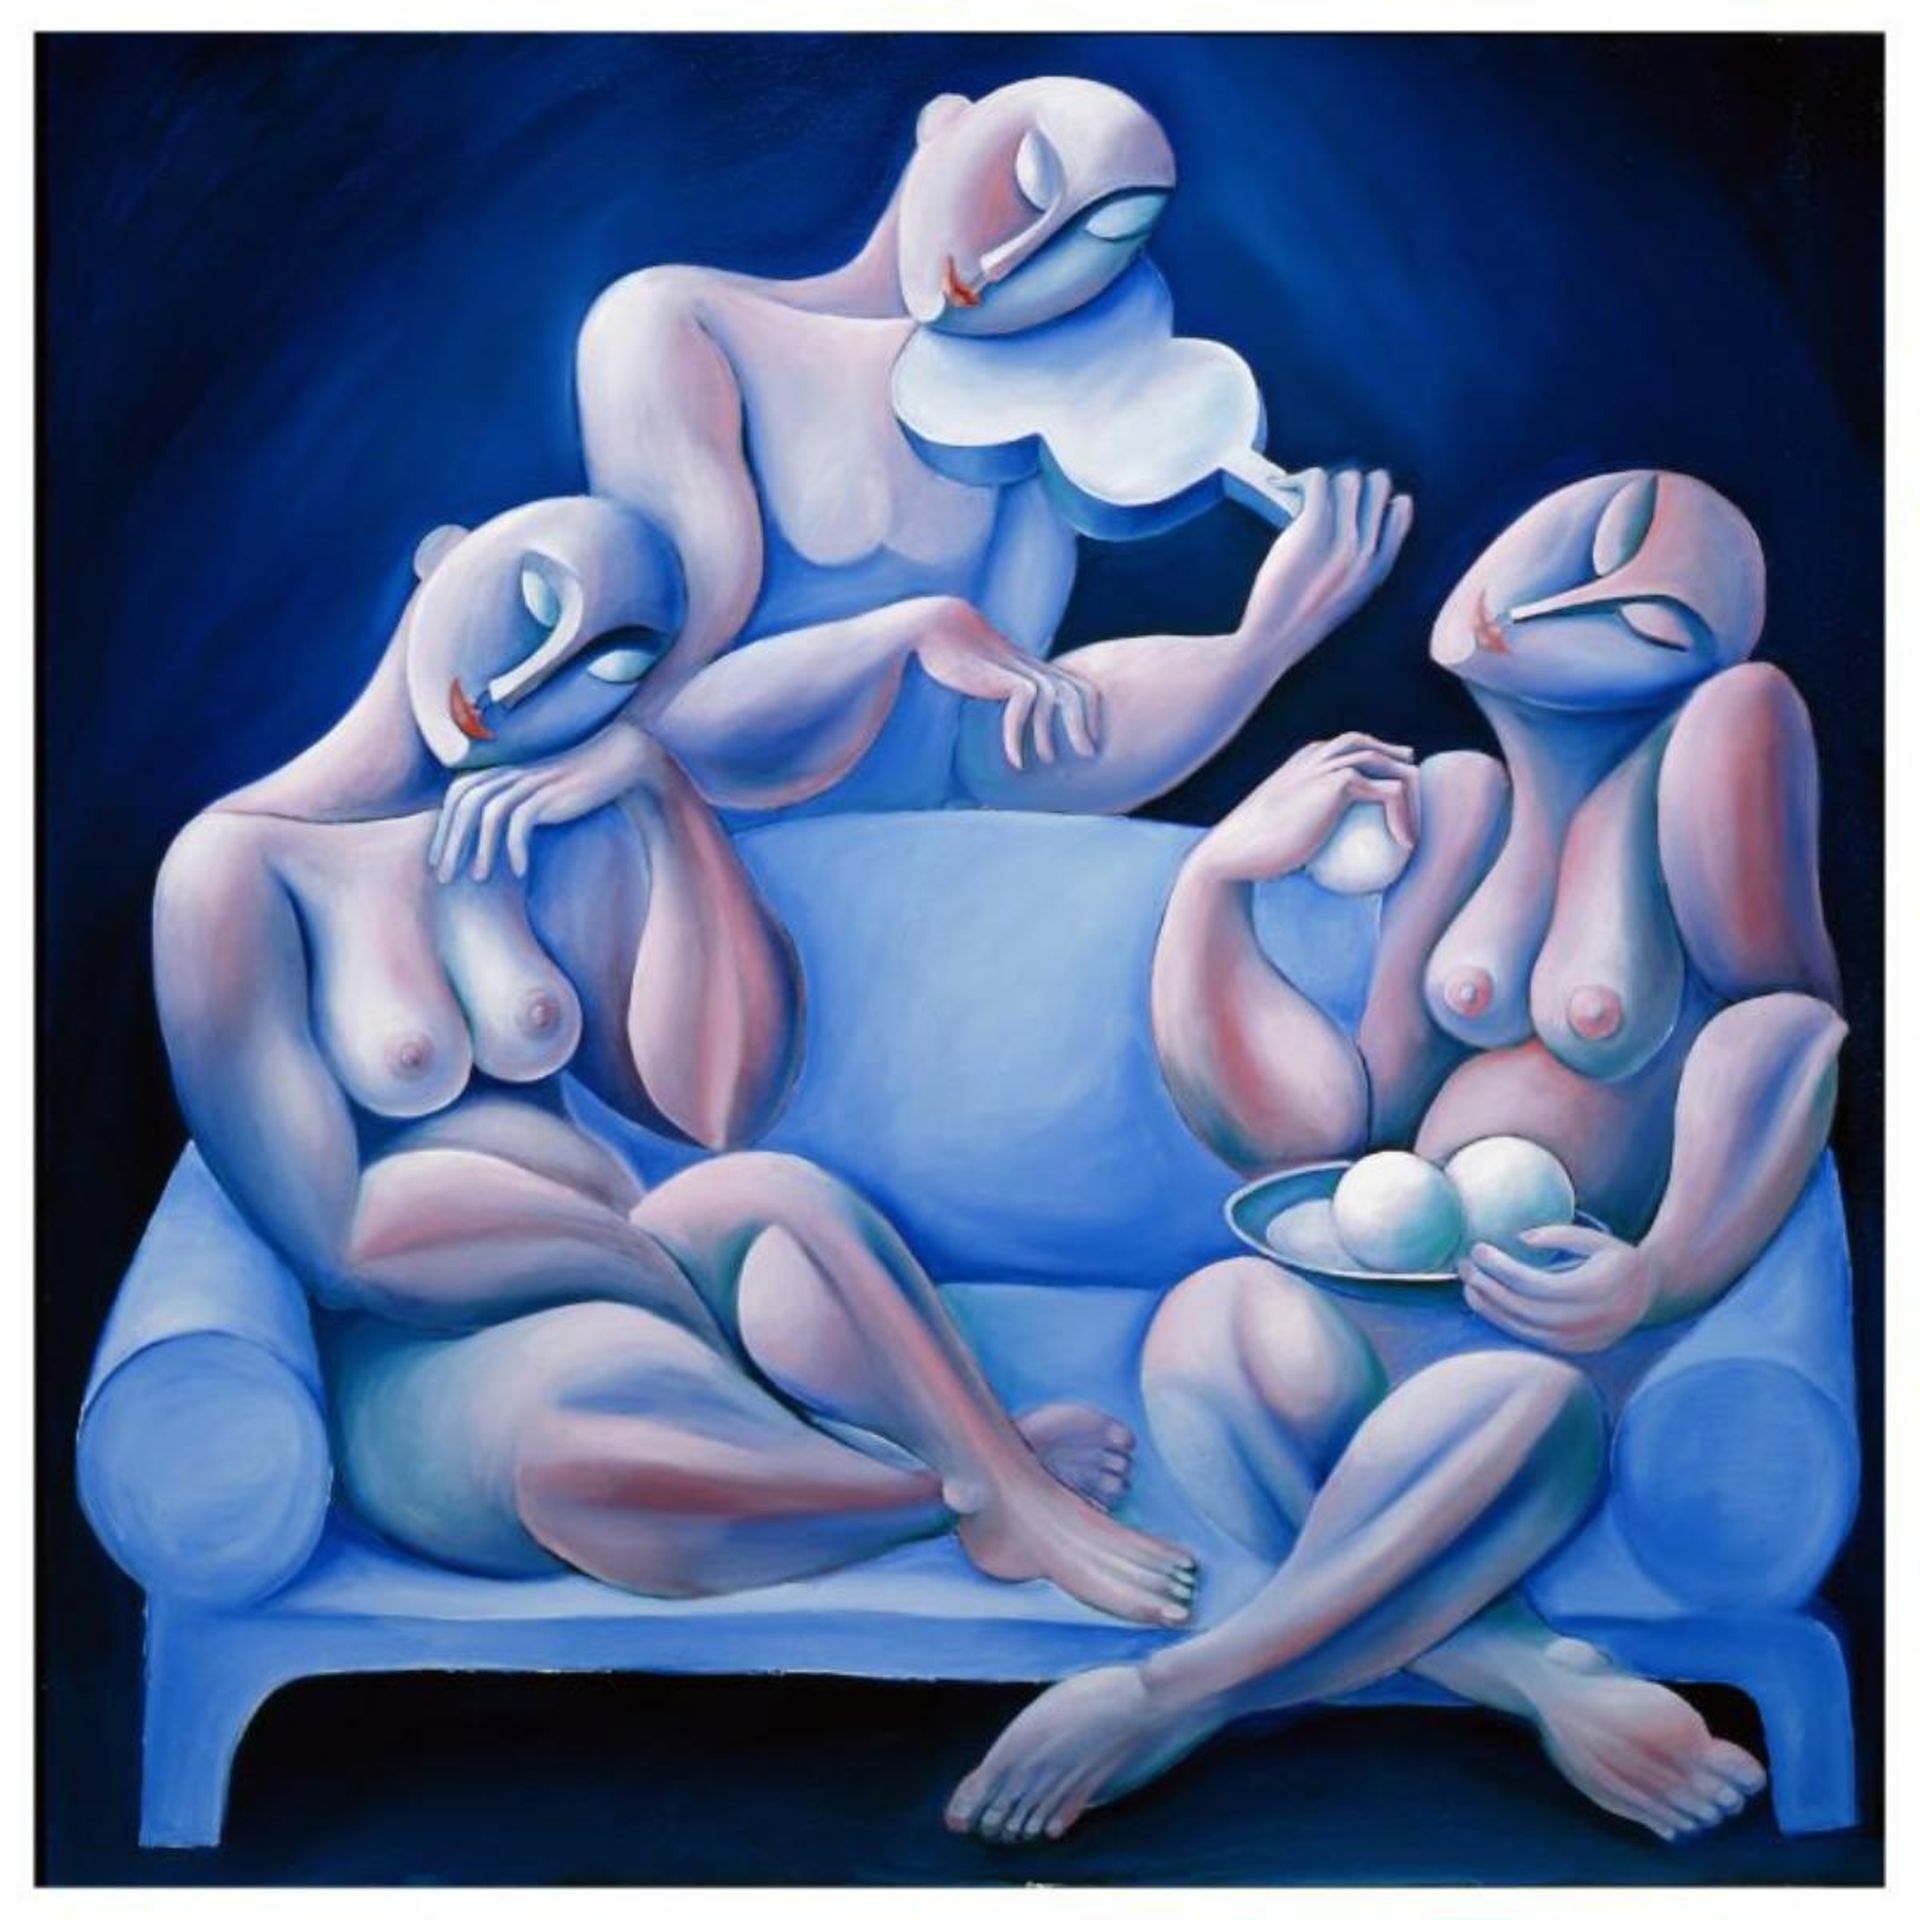 Yuroz, "The Light Blue Couch" Hand Signed Limited Edition Serigraph on Canvas wi